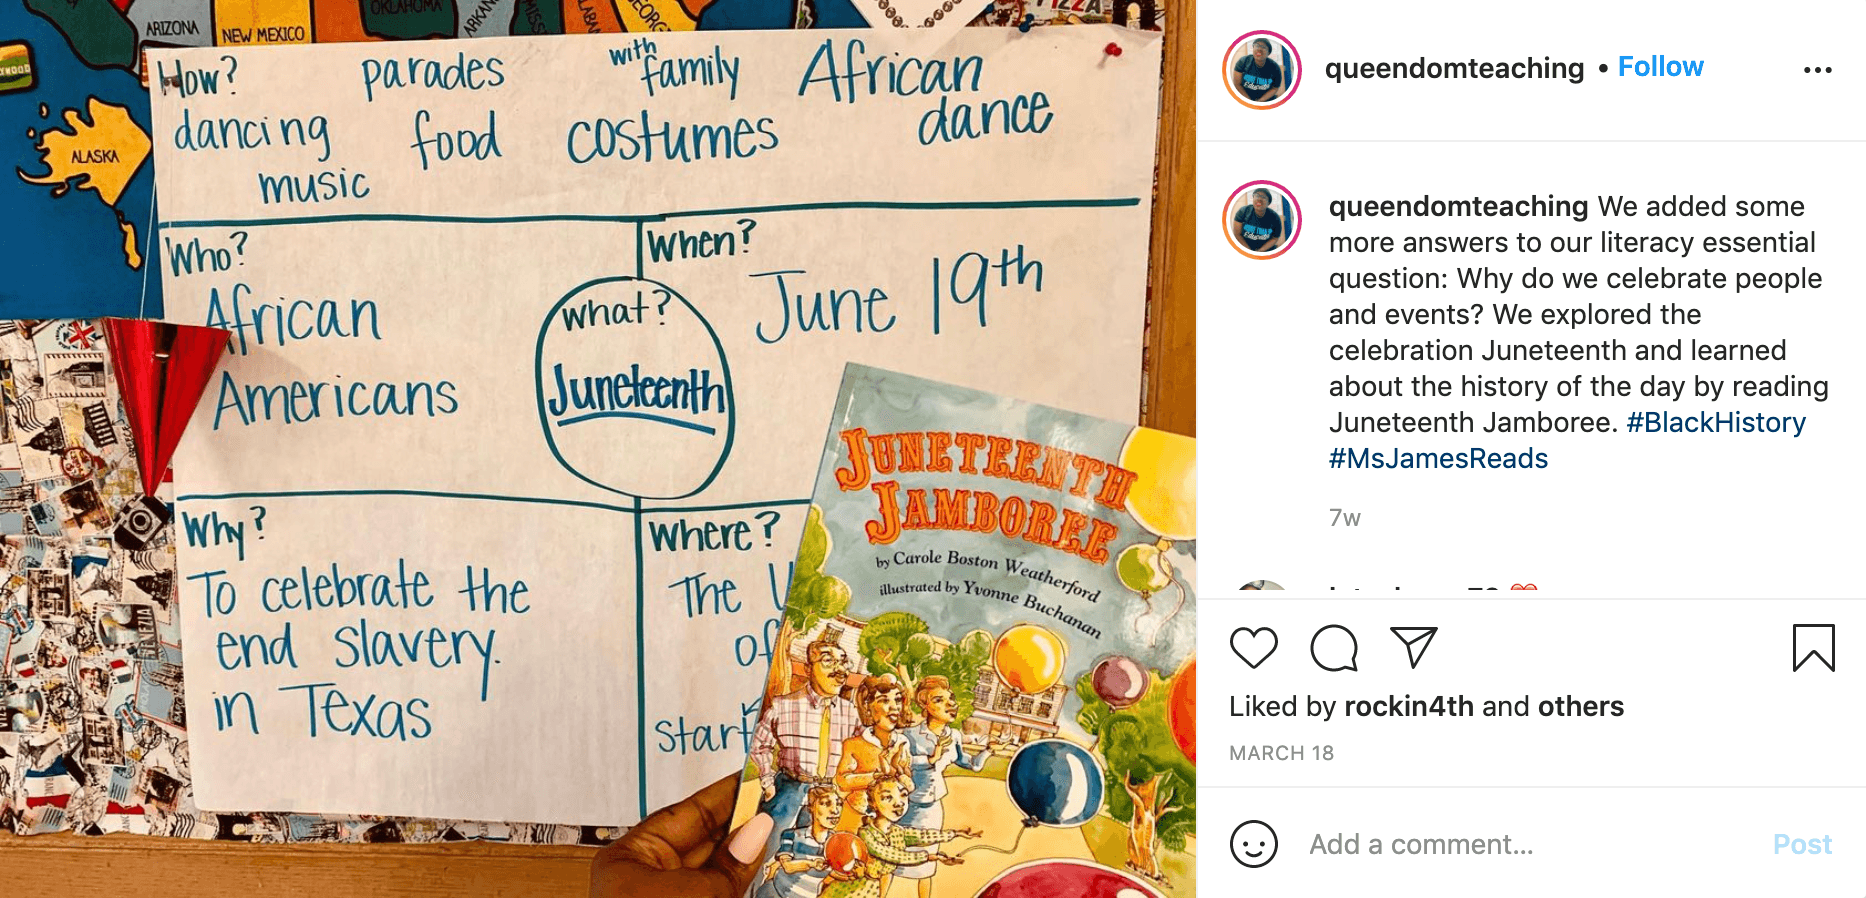 An Instagram post from Dawnavyn James, showing a classroom poster about Juneteenth, with the children's book, "Juneteenth Jamboree." The caption says, "We added some more questions to our literacy essential question: Why do we celebrate people and events? We explored the celebration Juneteenth and learned about the history of the day by reading Juneteenth Jamboree."